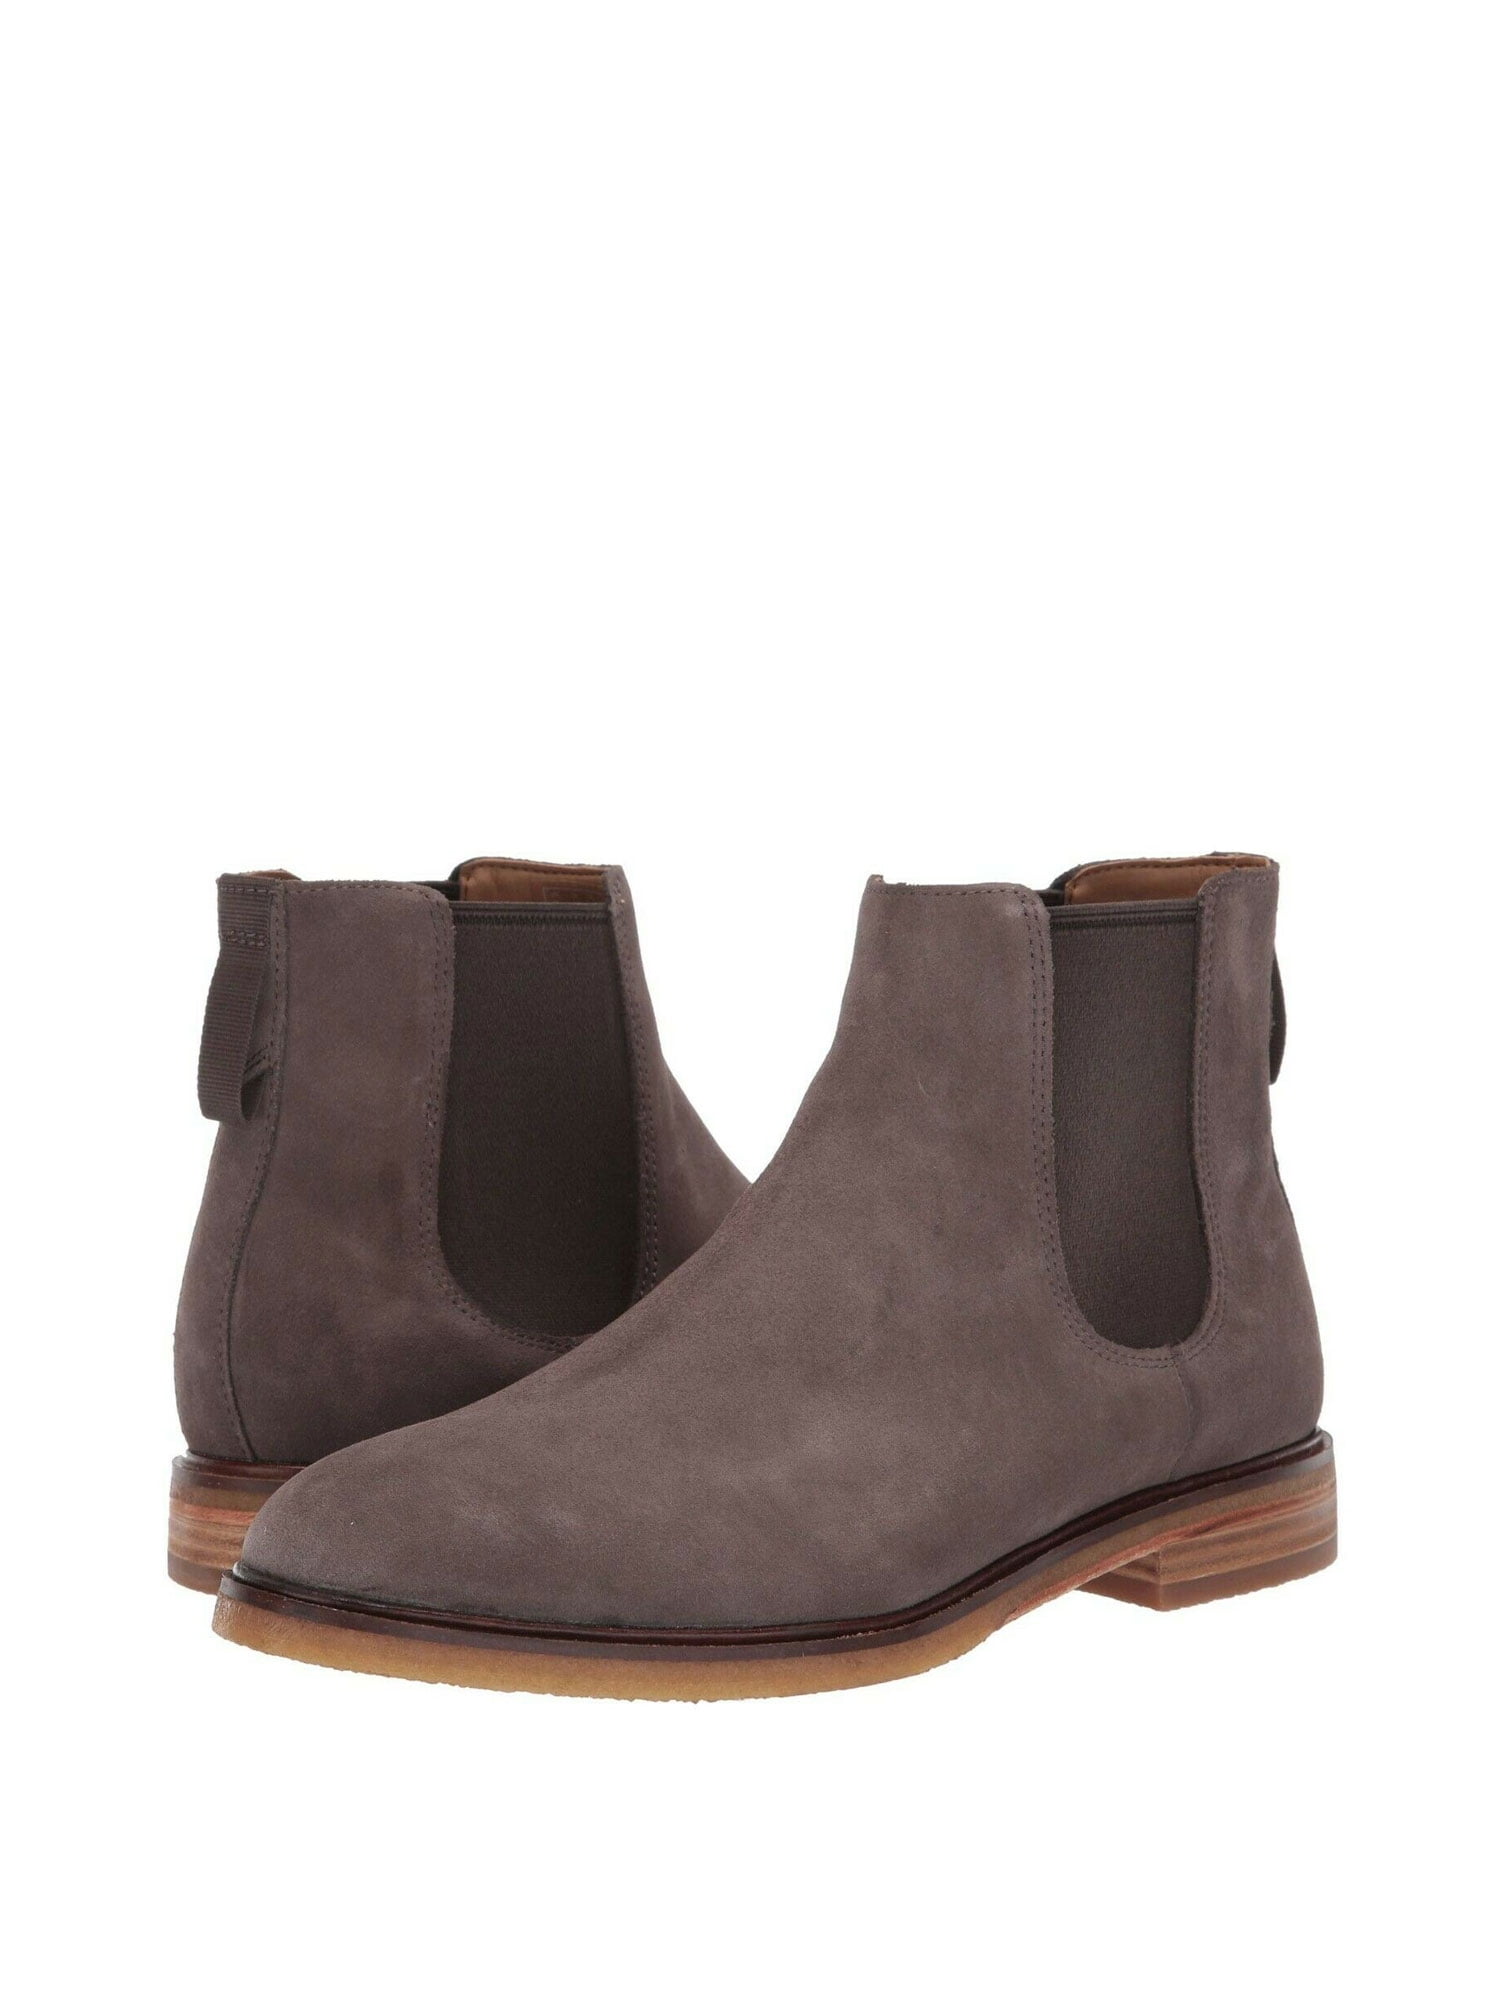 clarks mens suede chelsea boots